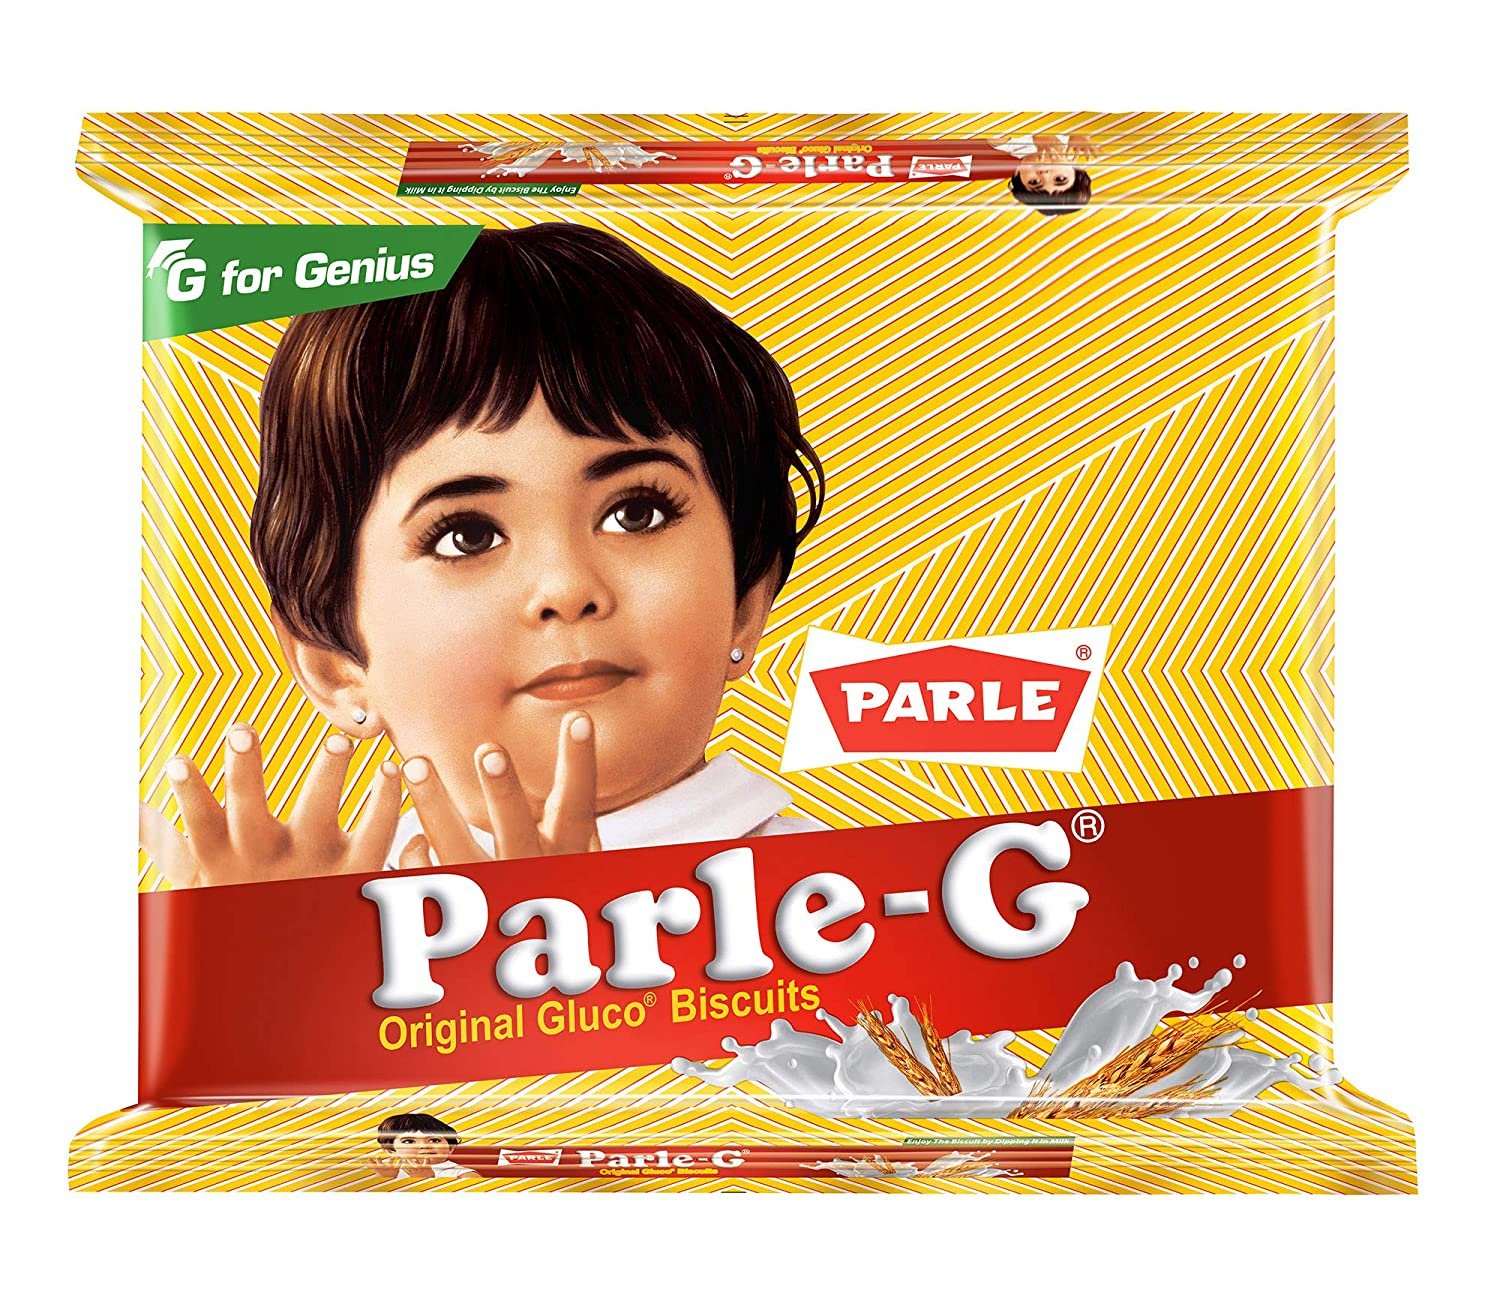 parle-to-donate-parle-g-biscuits-through-govt-agencies